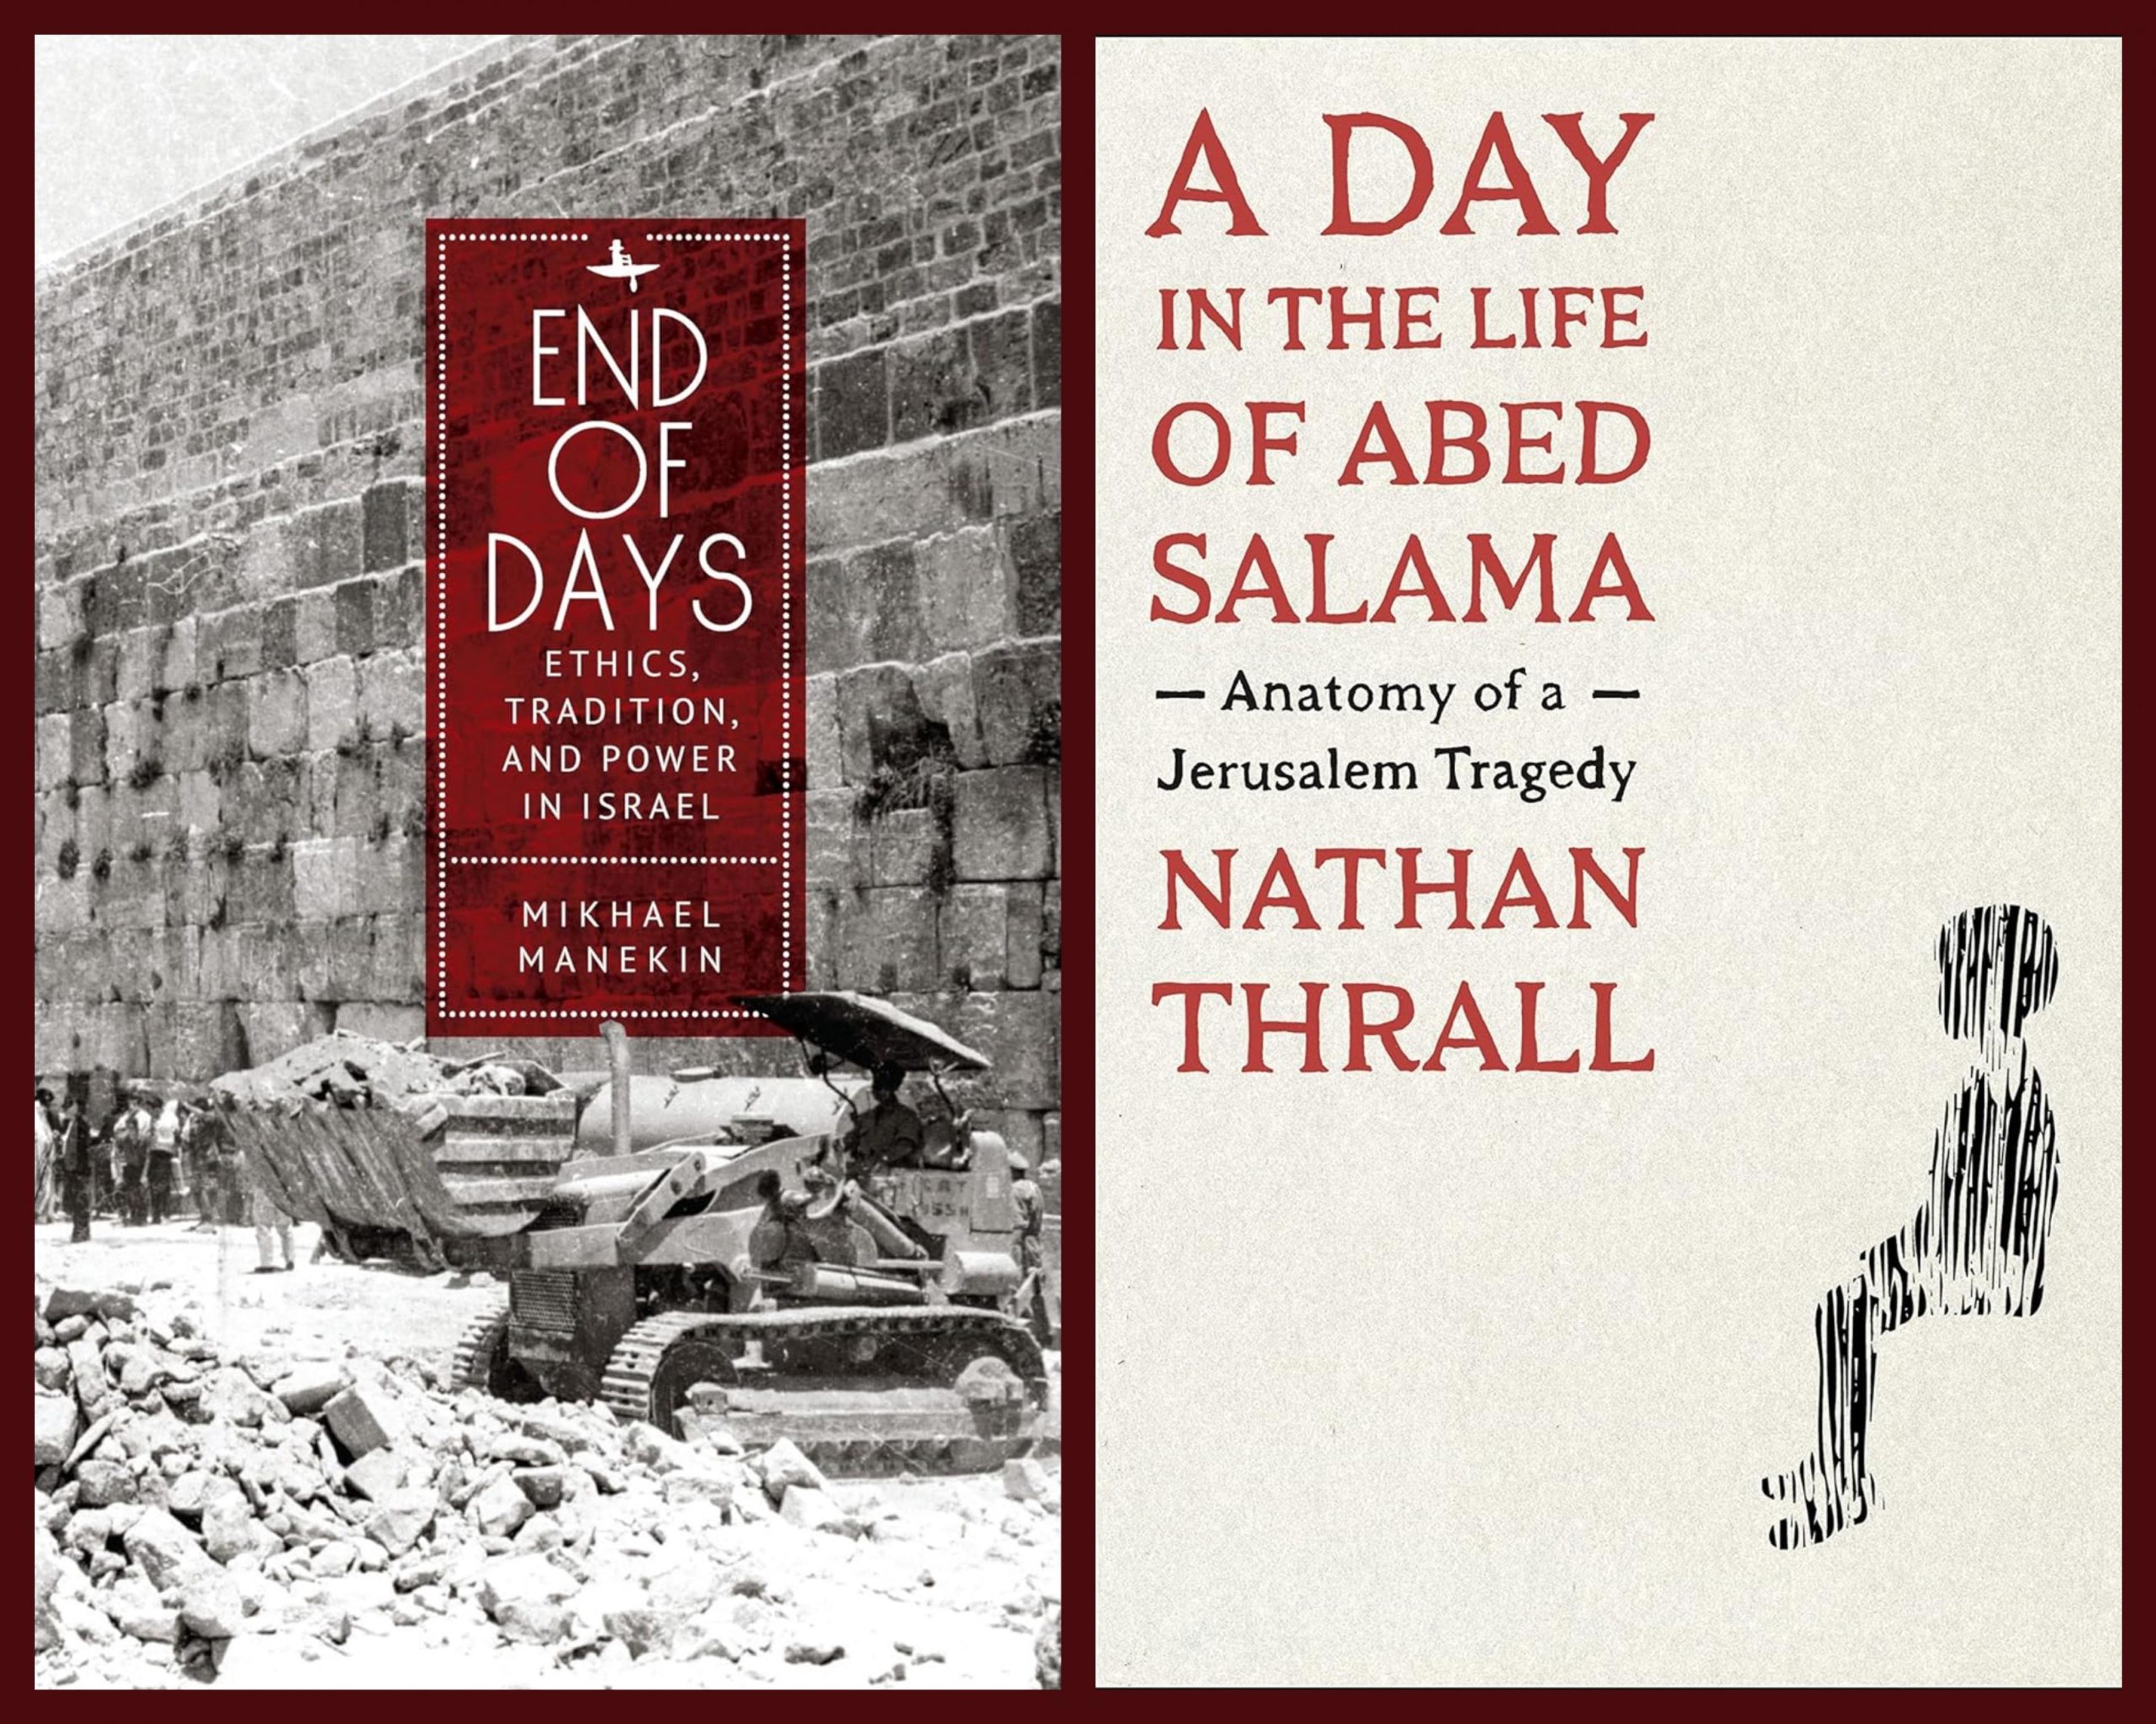 No Accident: On Two New Books About the Occupied Territories